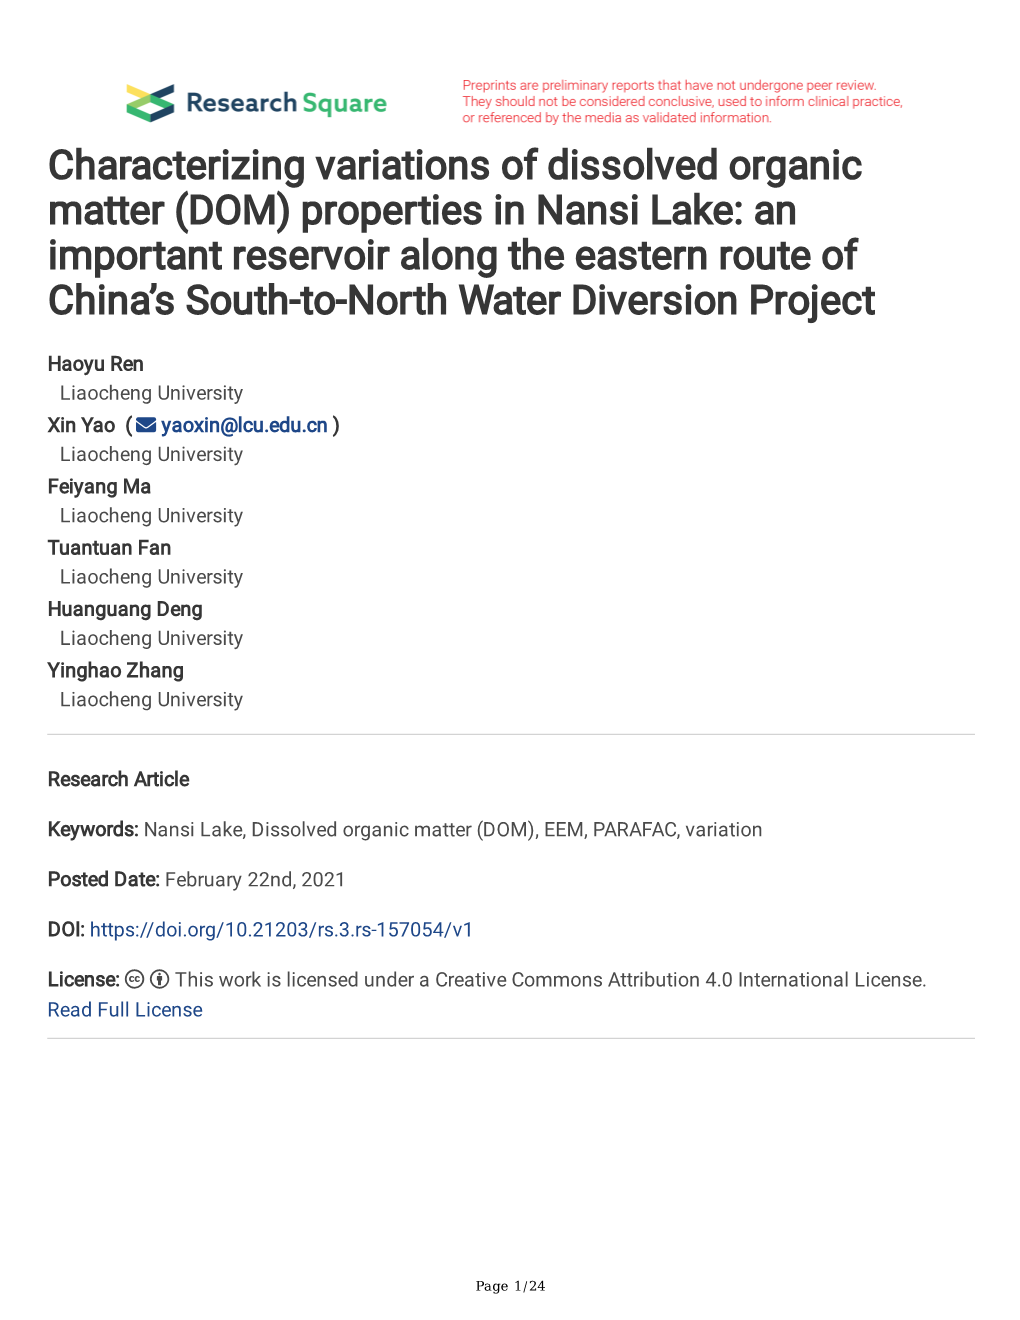 Characterizing Variations of Dissolved Organic Matter